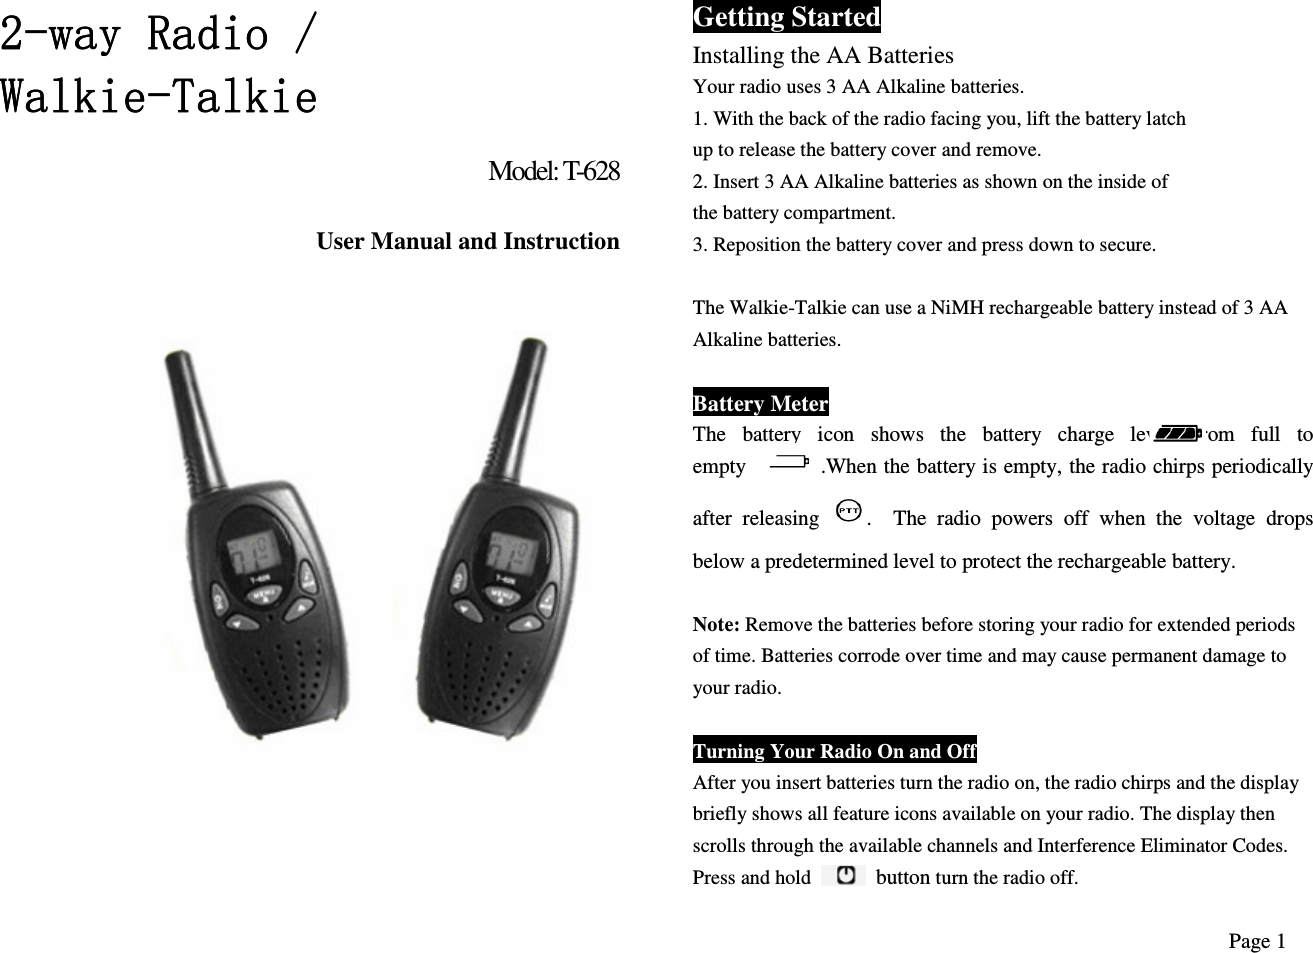 2222----way Radio / way Radio / way Radio / way Radio / WalkieWalkieWalkieWalkie----TalkieTalkieTalkieTalkie    Model: T-628  User Manual and Instruction                        Getting Started Installing the AA Batteries Your radio uses 3 AA Alkaline batteries. 1. With the back of the radio facing you, lift the battery latch up to release the battery cover and remove. 2. Insert 3 AA Alkaline batteries as shown on the inside of the battery compartment. 3. Reposition the battery cover and press down to secure.  The Walkie-Talkie can use a NiMH rechargeable battery instead of 3 AA Alkaline batteries.  Battery Meter The  battery  icon  shows  the  battery  charge  level,  from  full  to empty              .When the battery is empty, the radio chirps periodically after  releasing  .    The  radio  powers  off  when  the  voltage  drops below a predetermined level to protect the rechargeable battery.  Note: Remove the batteries before storing your radio for extended periods of time. Batteries corrode over time and may cause permanent damage to your radio.  Turning Your Radio On and Off After you insert batteries turn the radio on, the radio chirps and the display briefly shows all feature icons available on your radio. The display then scrolls through the available channels and Interference Eliminator Codes. Press and hold    button turn the radio off. Page 1 